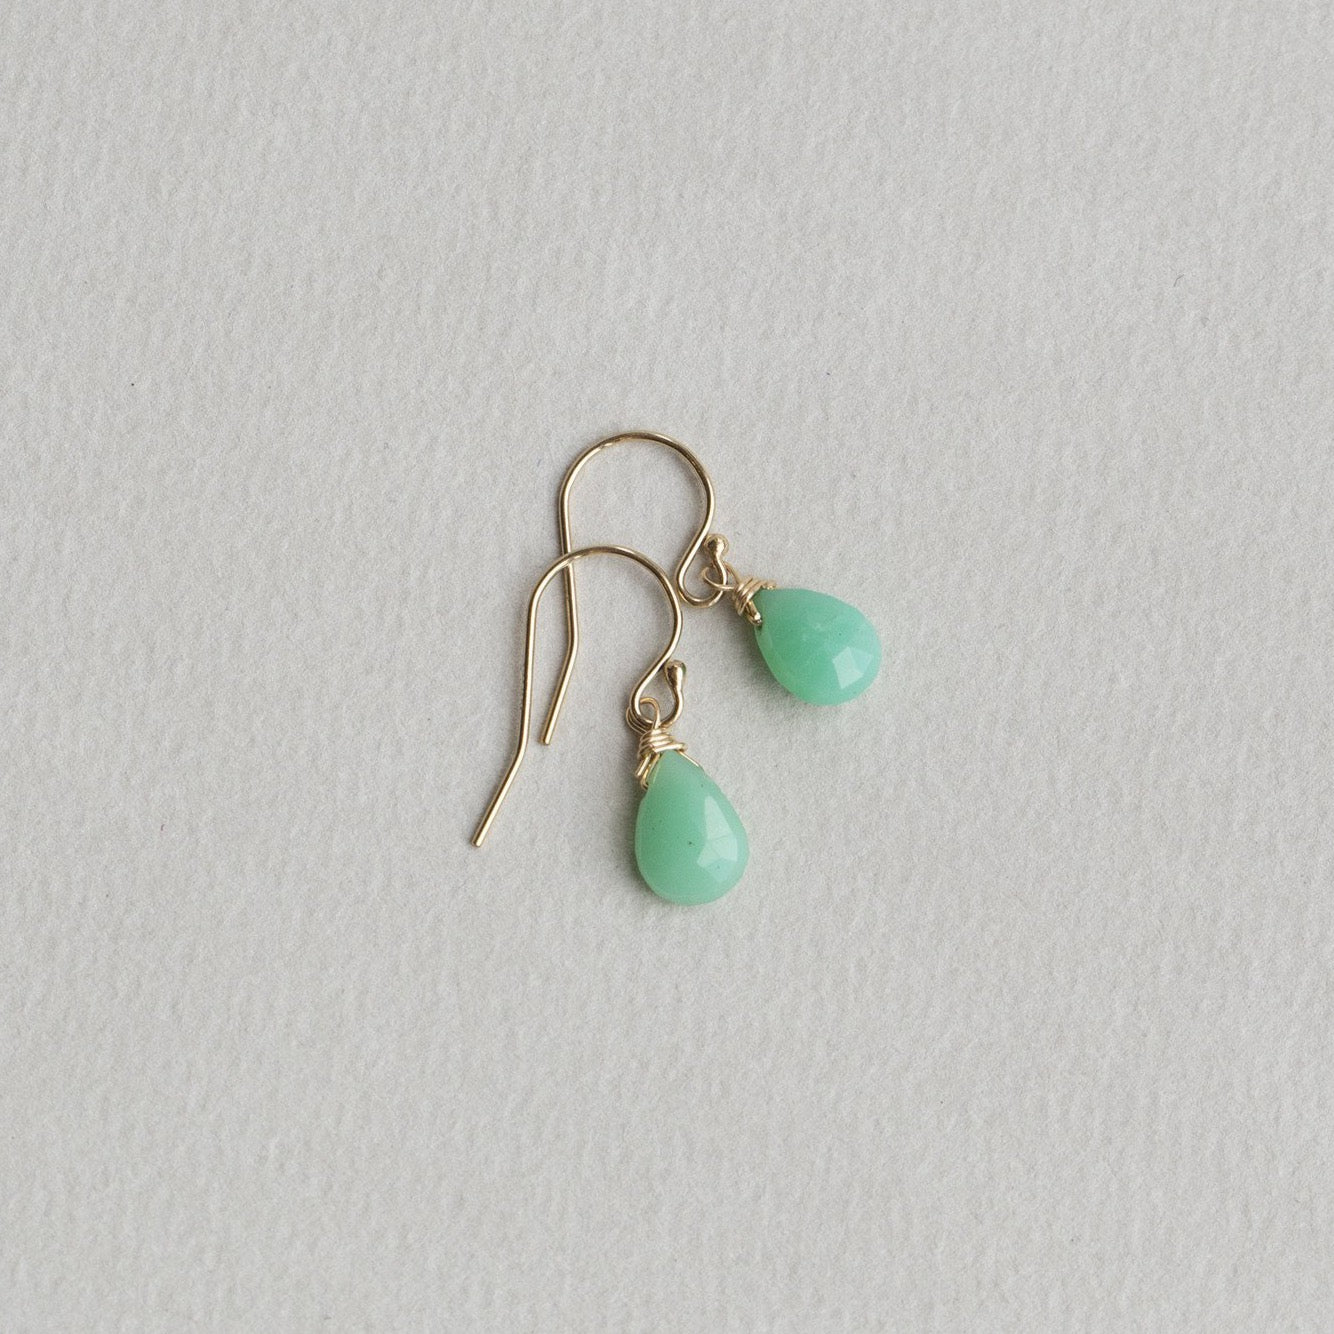 chrysoprase briolette drop earrings with gold filled hooks